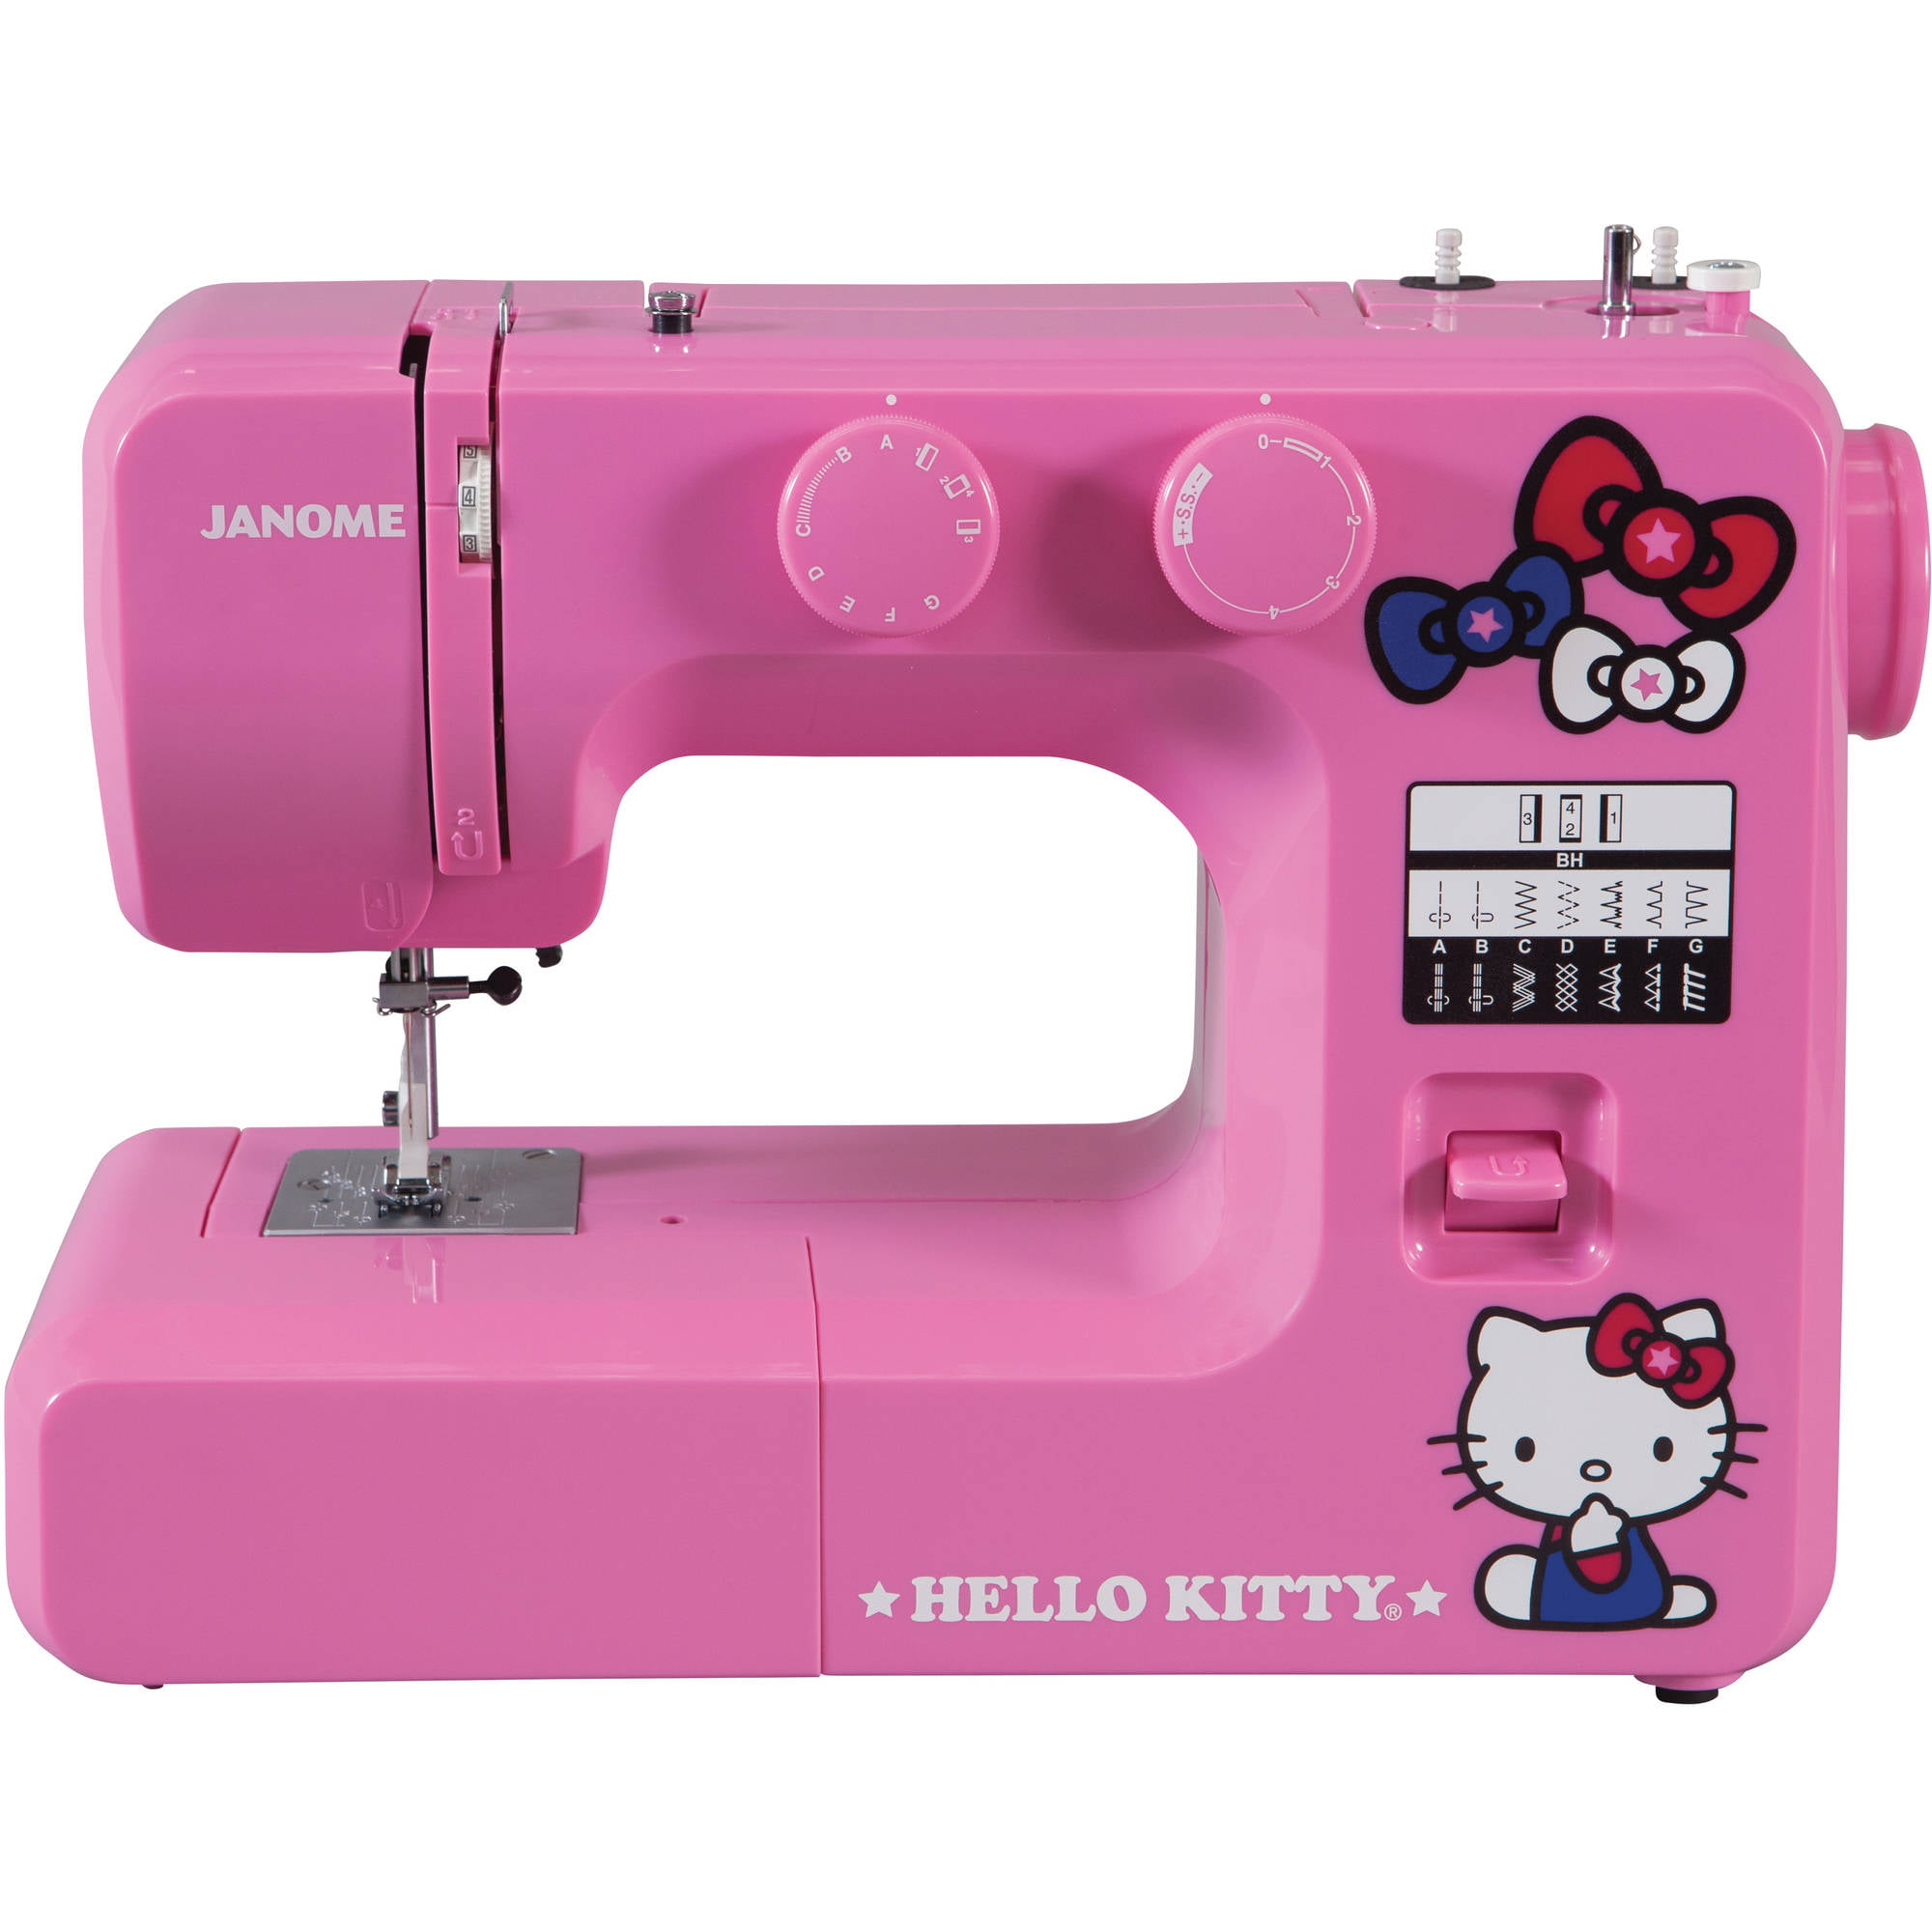 Bobbin, Wire Threading, Sewing Needle Missing] Hello Kitty Sewing Machine  KT-35 Sanrio Character Connectors, Goods / Accessories